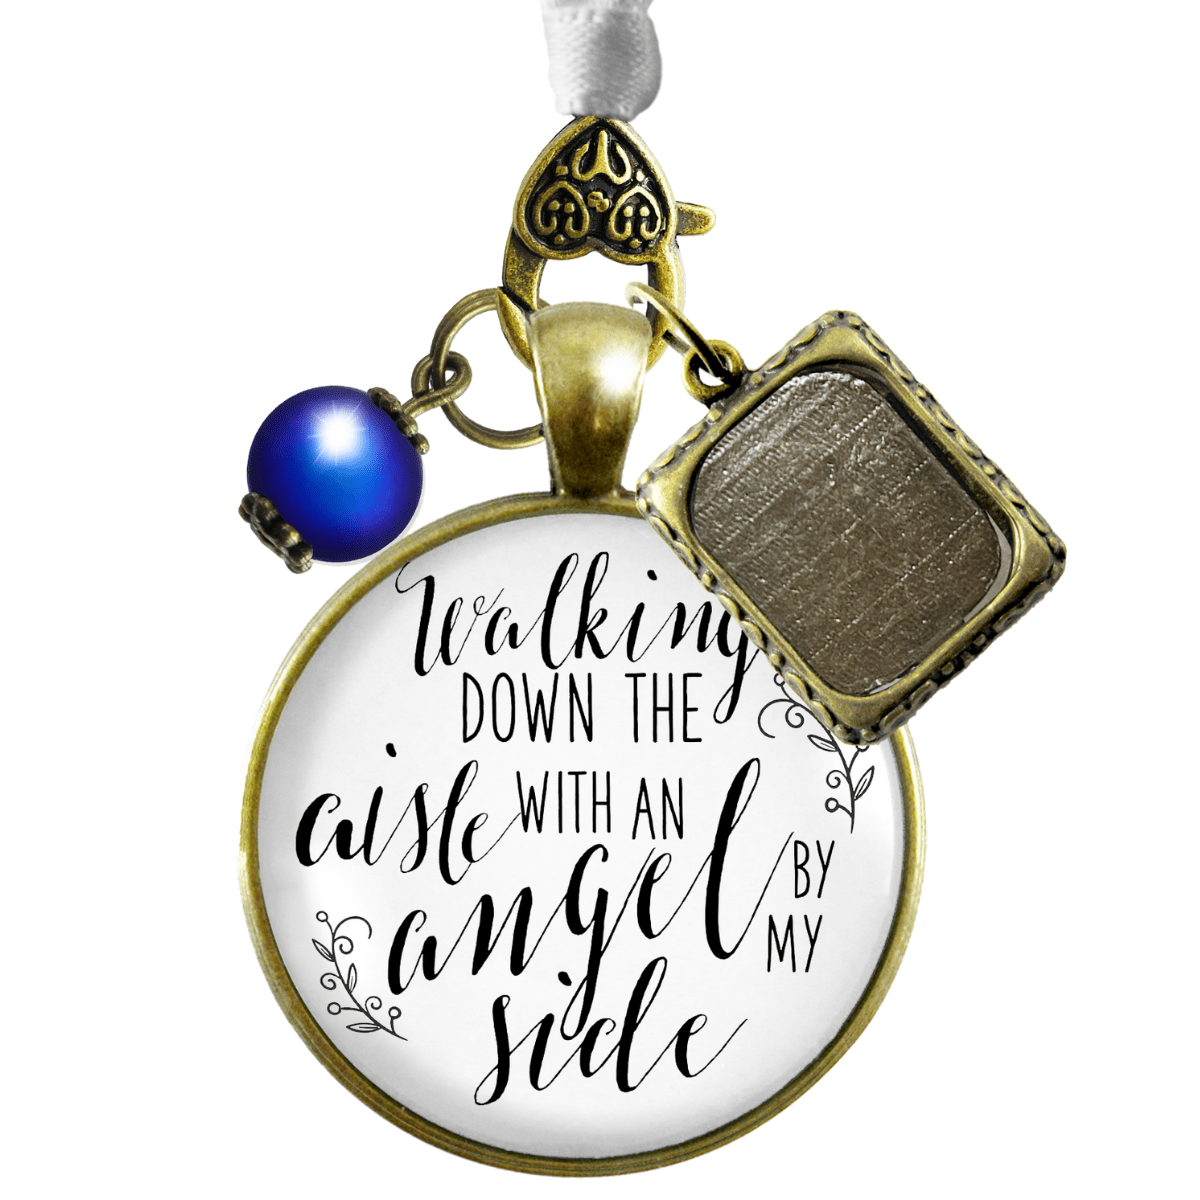 Walking Down The Aisle With An Angel By My Side - BRONZE - WHITE - BLUE BEAD - 1 FRAME